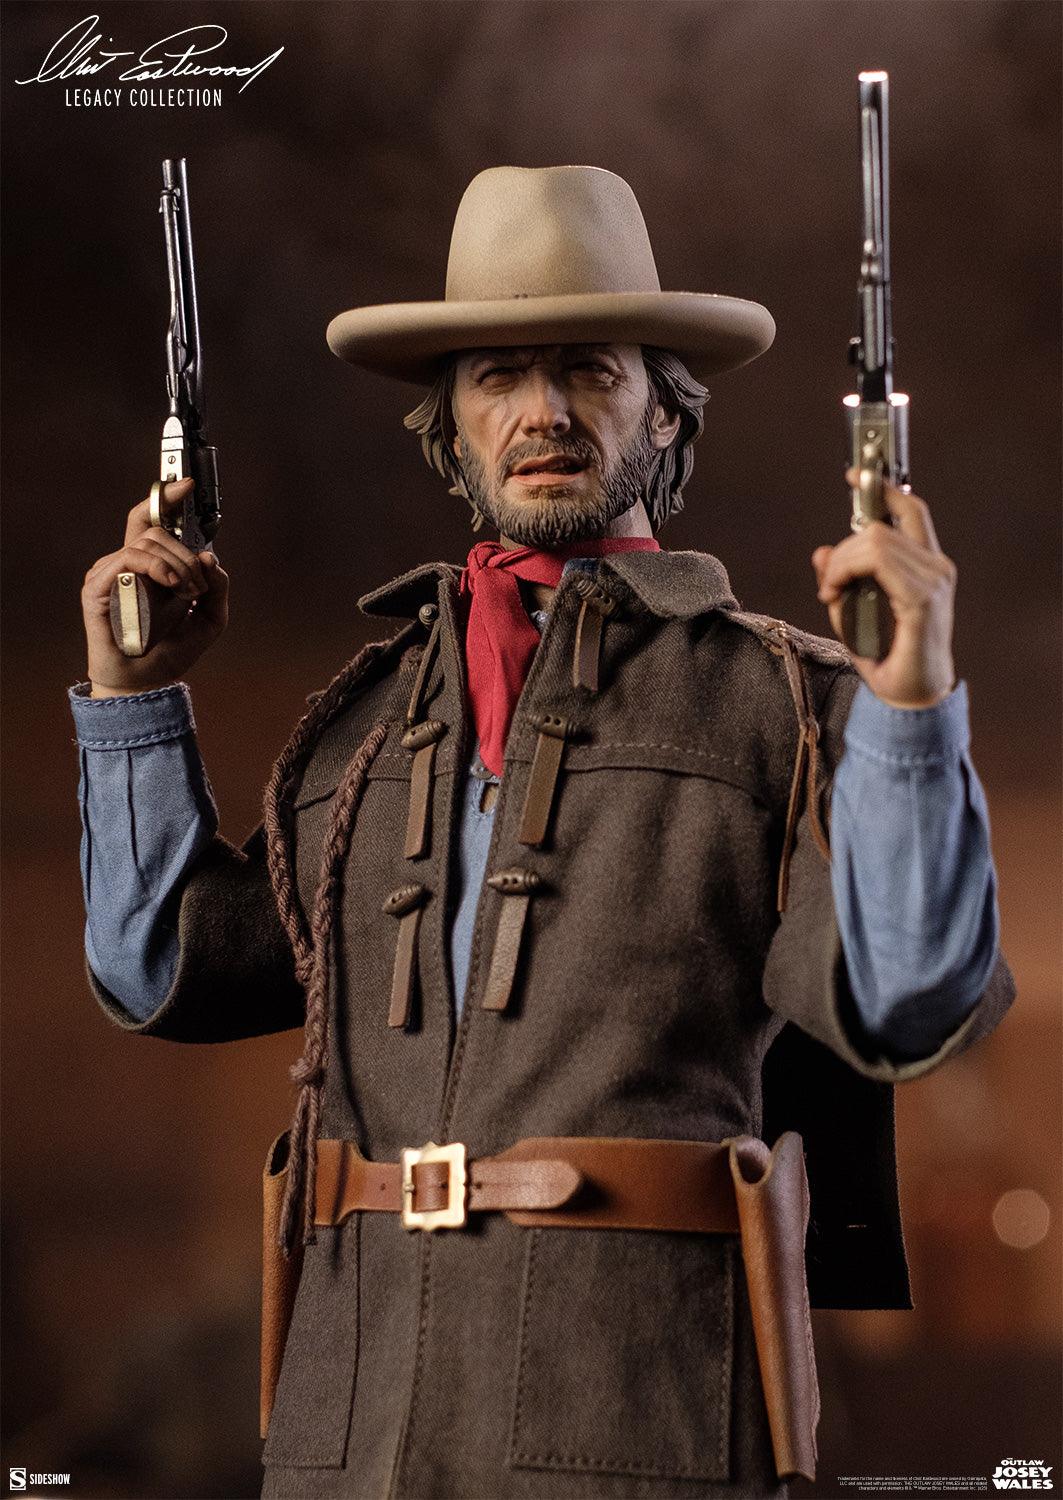 SID100454 Clint Eastwood - The Outlaw Josey Wales 1:6 Scale Action Figure - Sideshow Collectibles - Titan Pop Culture